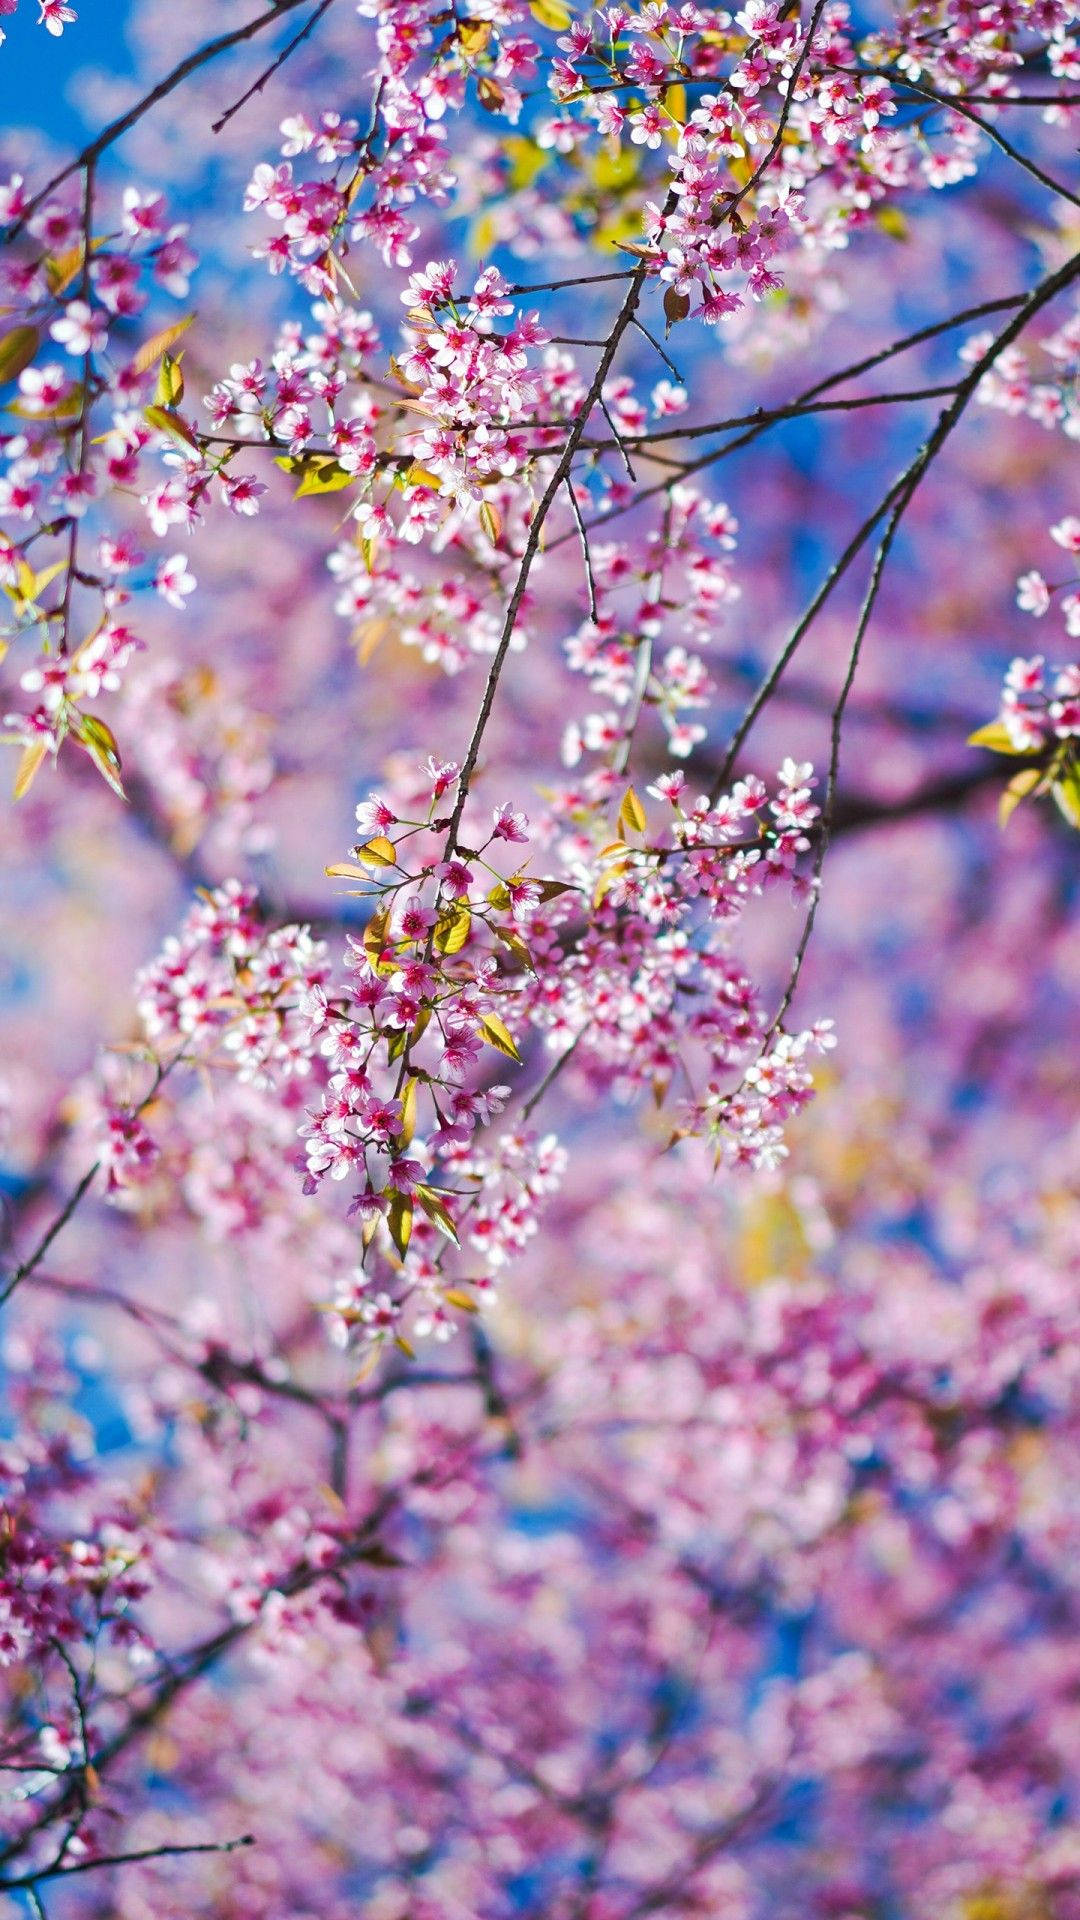 Enjoy the beauty of spring blooms with this gorgeous Spring Flower iPhone wallpaper. Wallpaper